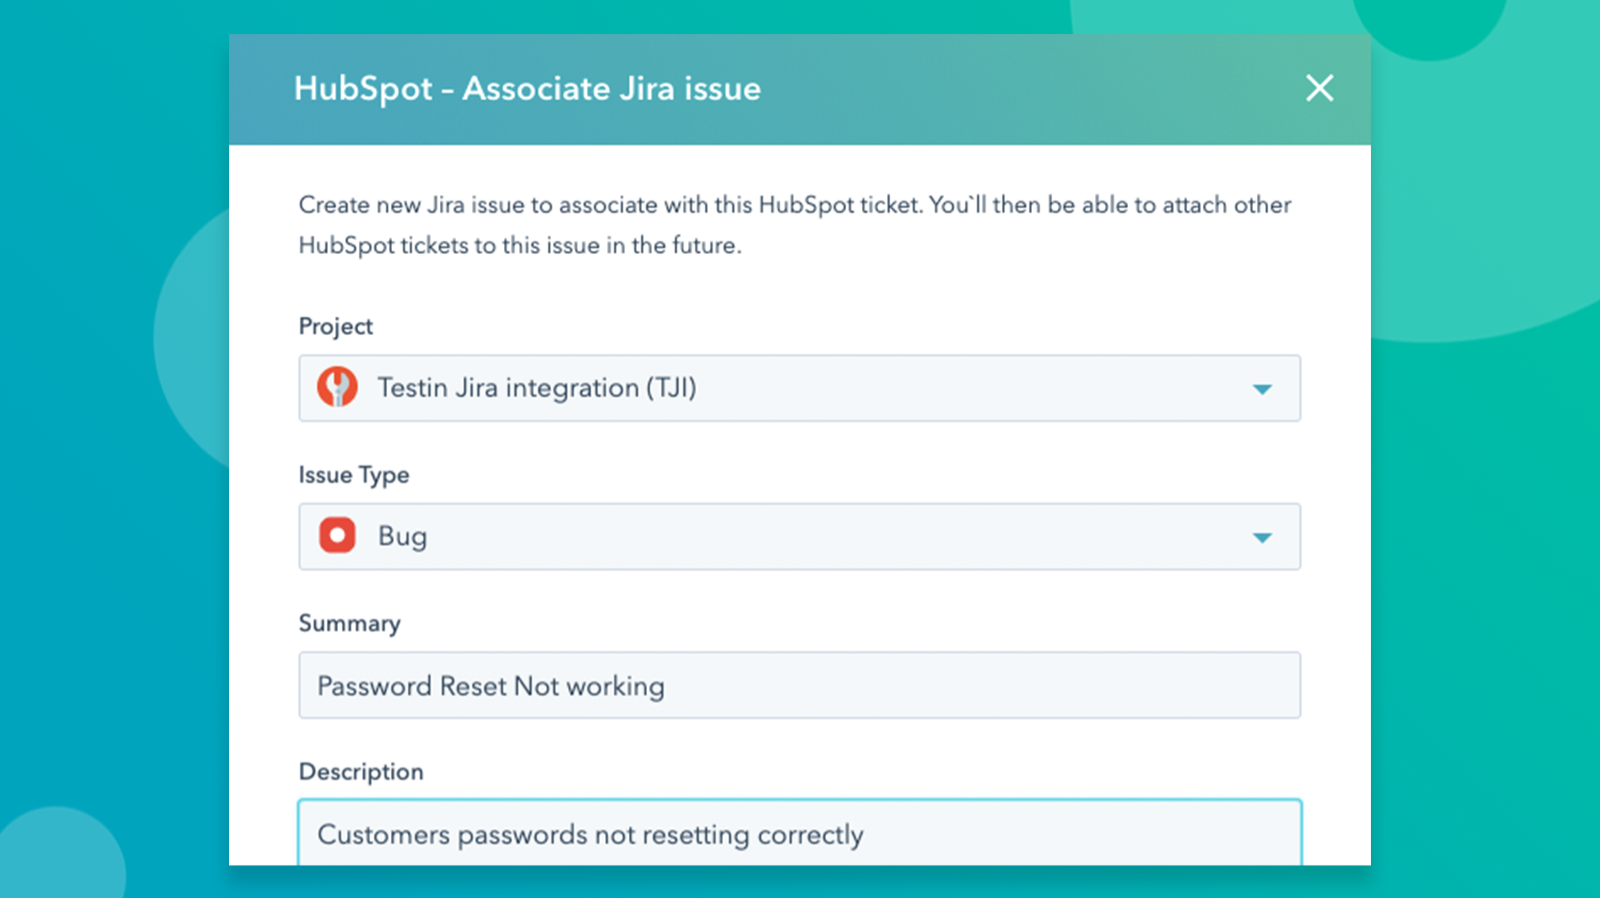 Screenshot showing the creation of a new Jira issue and associating it with a HubSpot ticket